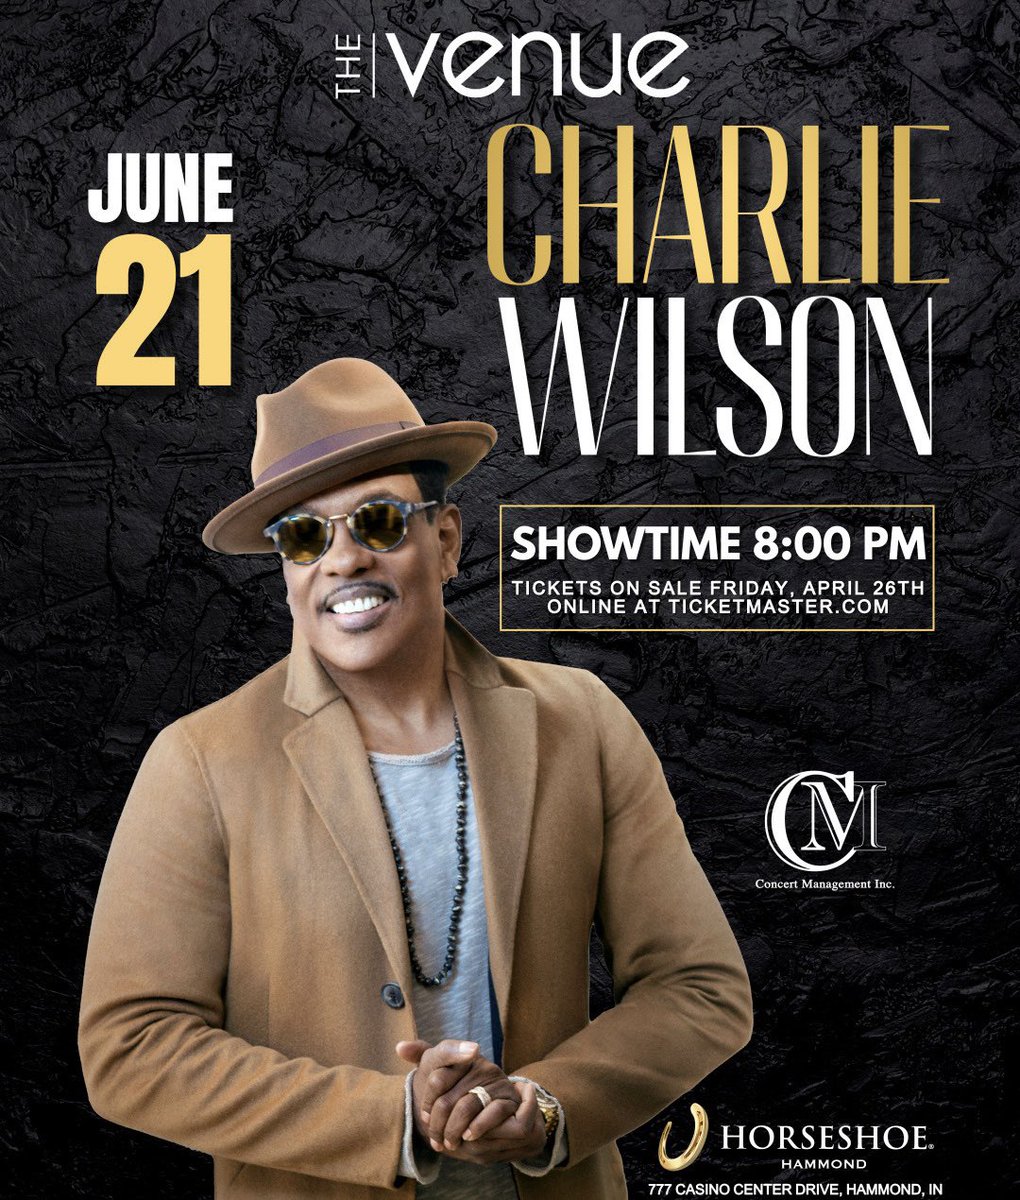 Hammond, IN! I’ll be performing at The Venue at @HorseshoeHammnd on Friday, 6/21!🎤 Tickets on sale this Friday, 4/26 at 10am local time! 🎶 @PMusicGroup lnk.to/CharlieWilson